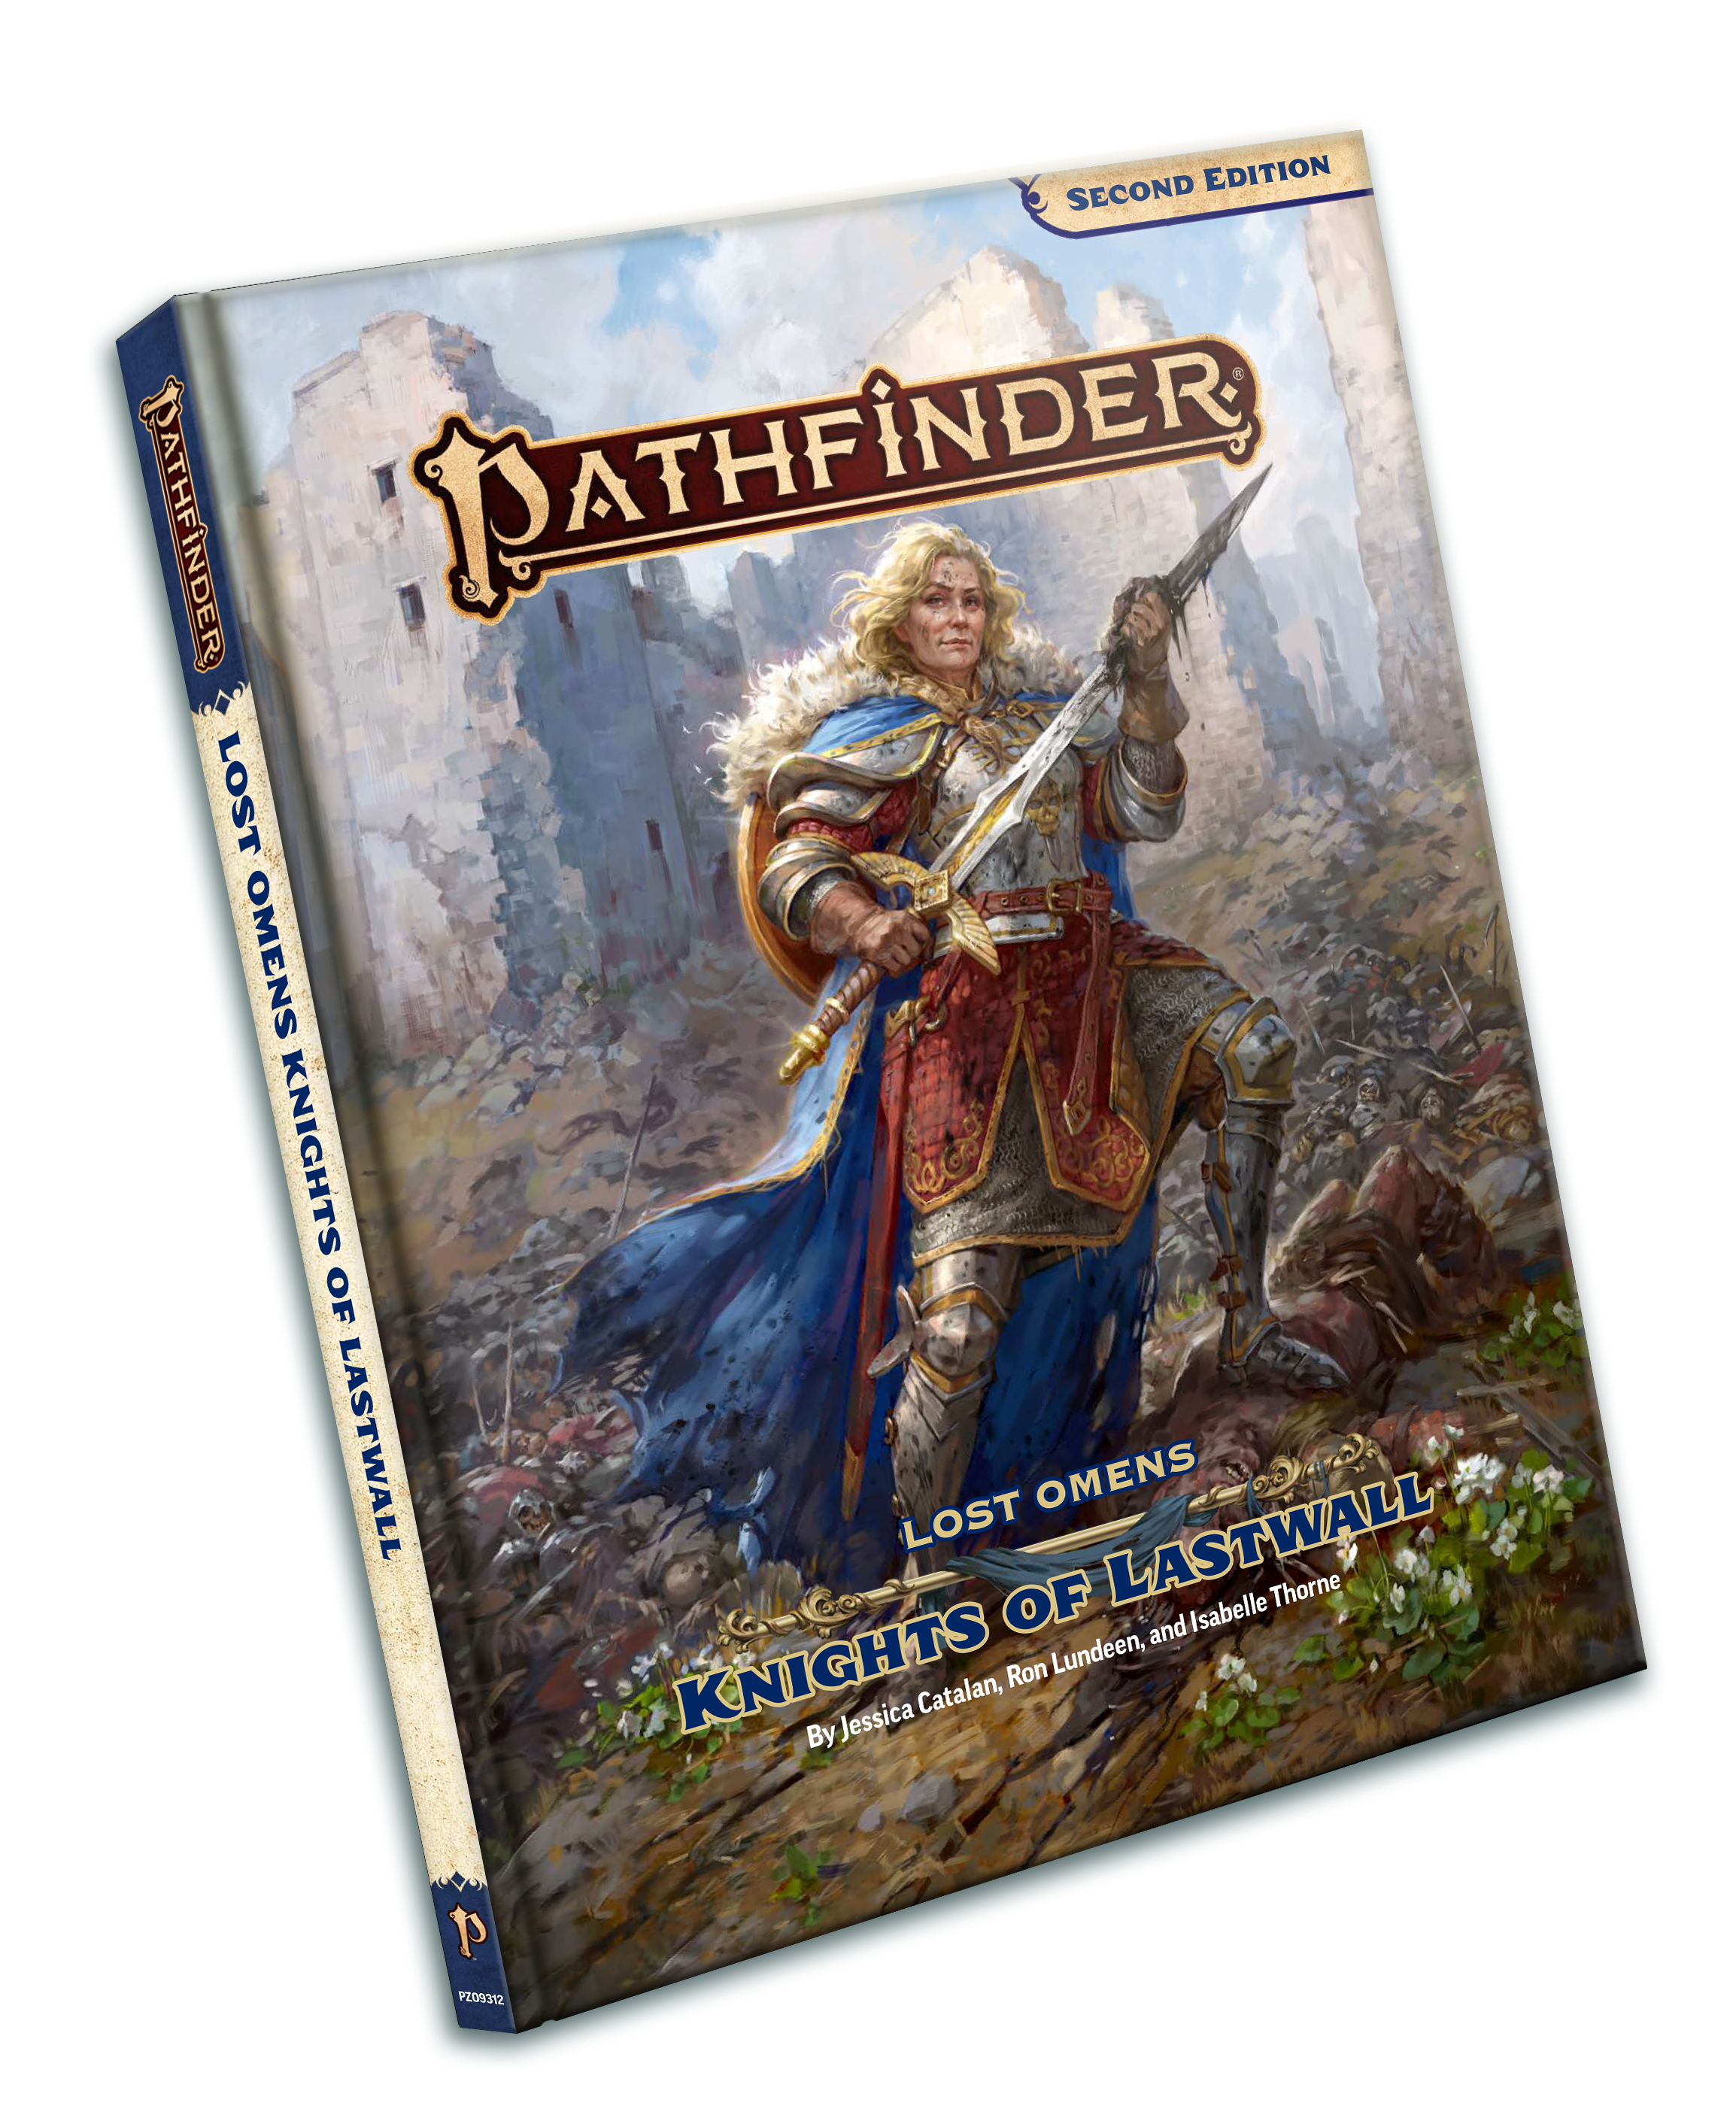 Pathfinder RPG: Lost Omens - Knights of Lastwall Hardcover